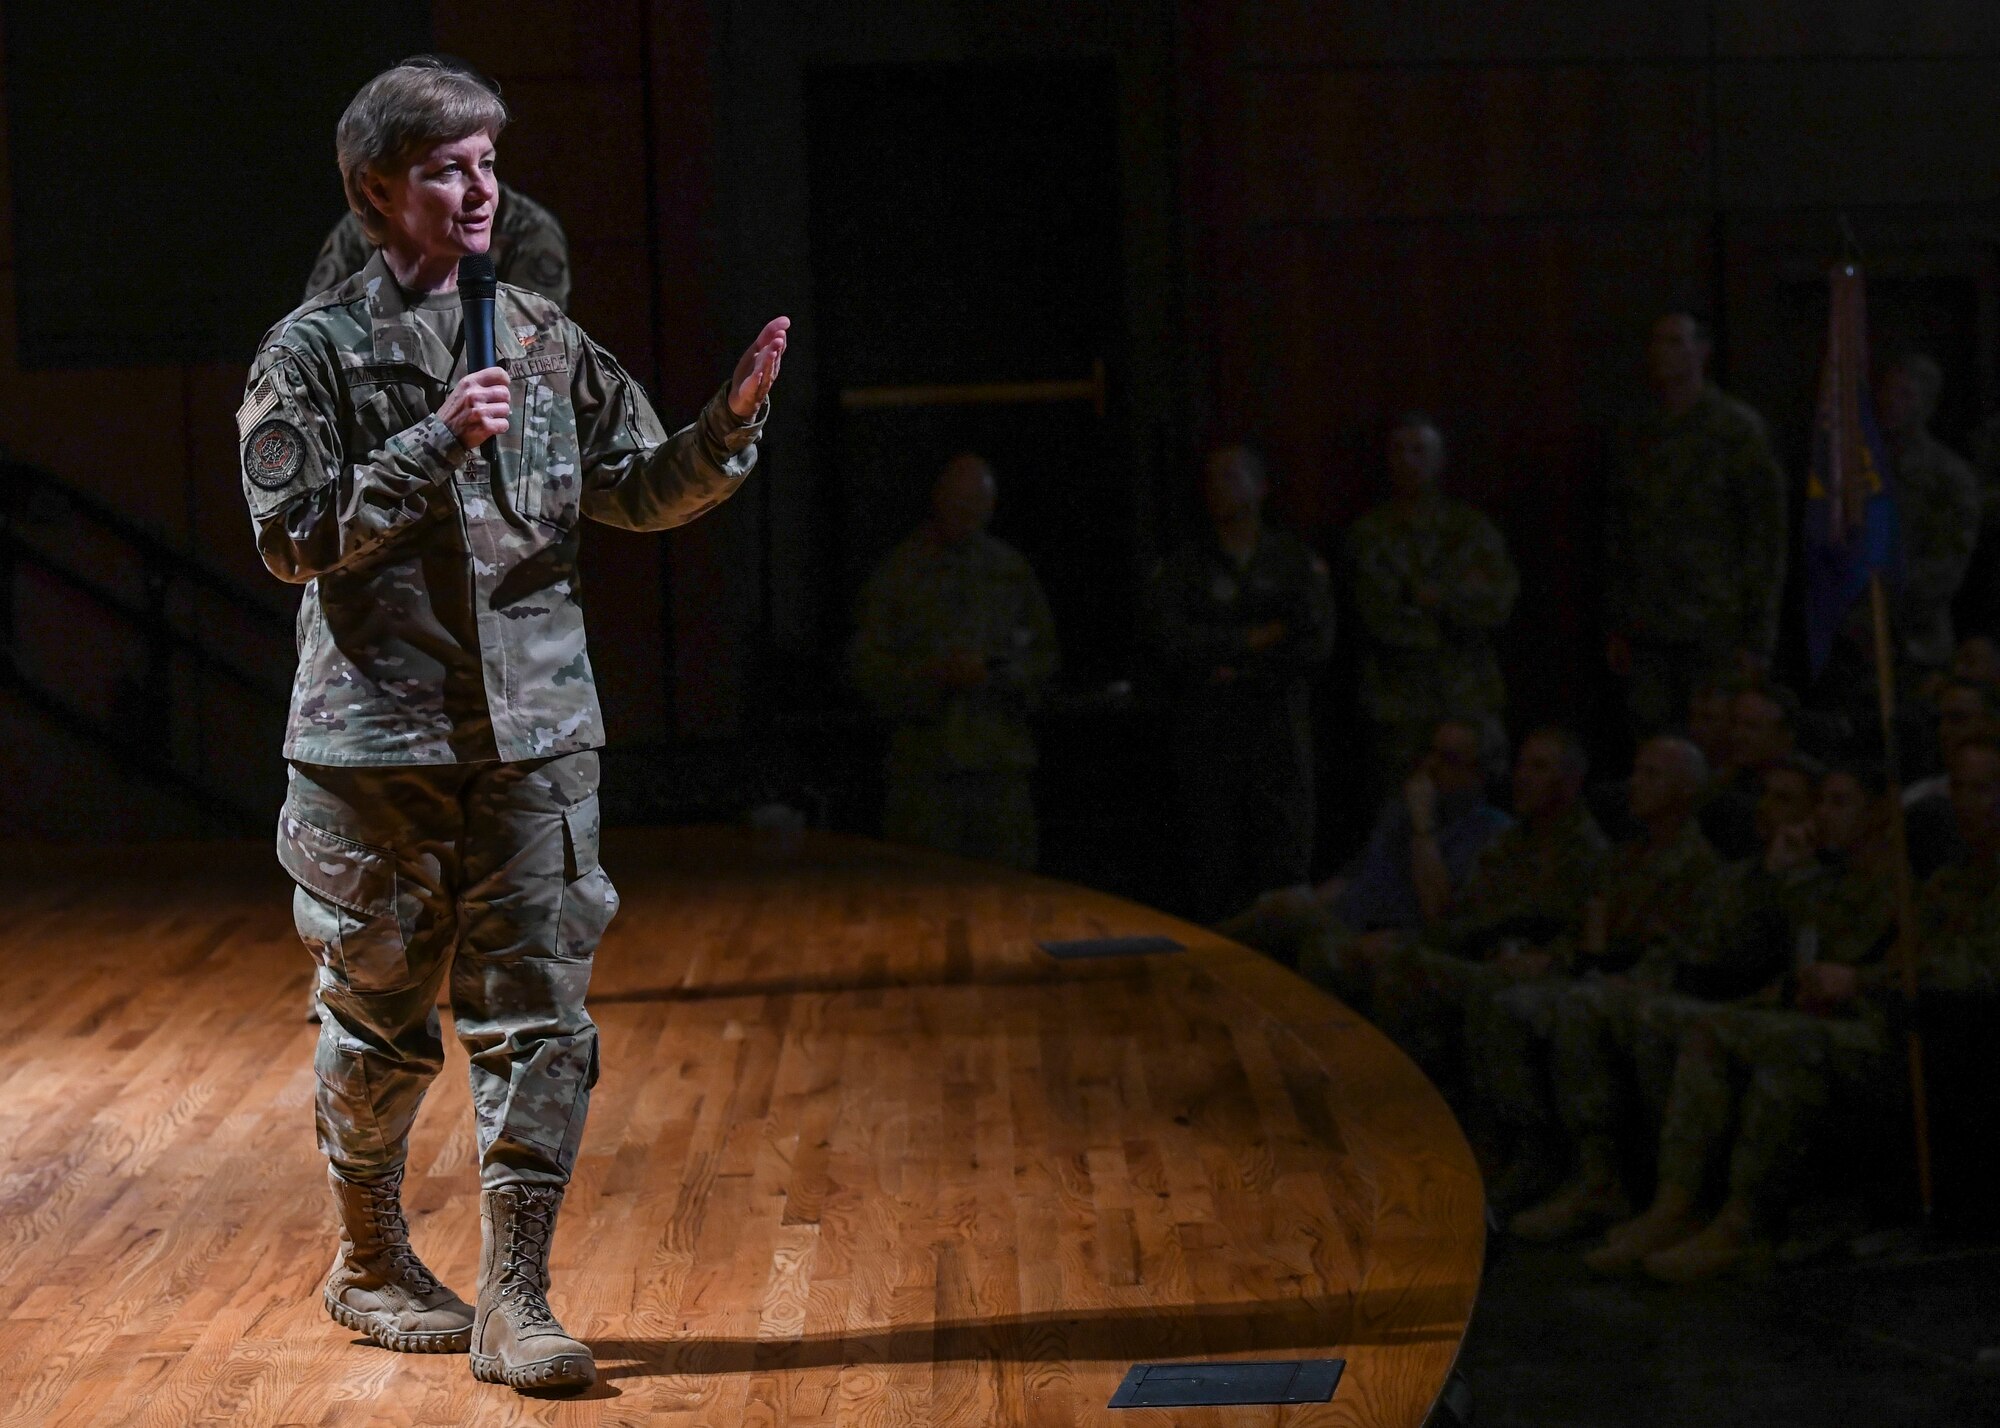 Gen. Maryanne Miller, commander of Air Mobility Command, speaks at an all-call during a visit to Joint Base Charleston, South Carolina, July 30, 2019. Miller spoke about AMC’s priorities, mission and how Airmen play a role in the mission. Miller visited JB Charleston July 29 to August 1 to get a first-hand look at mission capabilities, new innovative programs and how JB Charleston is taking care of its service members to build a stronger mobility force. AMC’s mission is to provide rapid, global mobility and sustainment for America's armed forces. The command also plays a crucial role in providing humanitarian support at home and around the world.